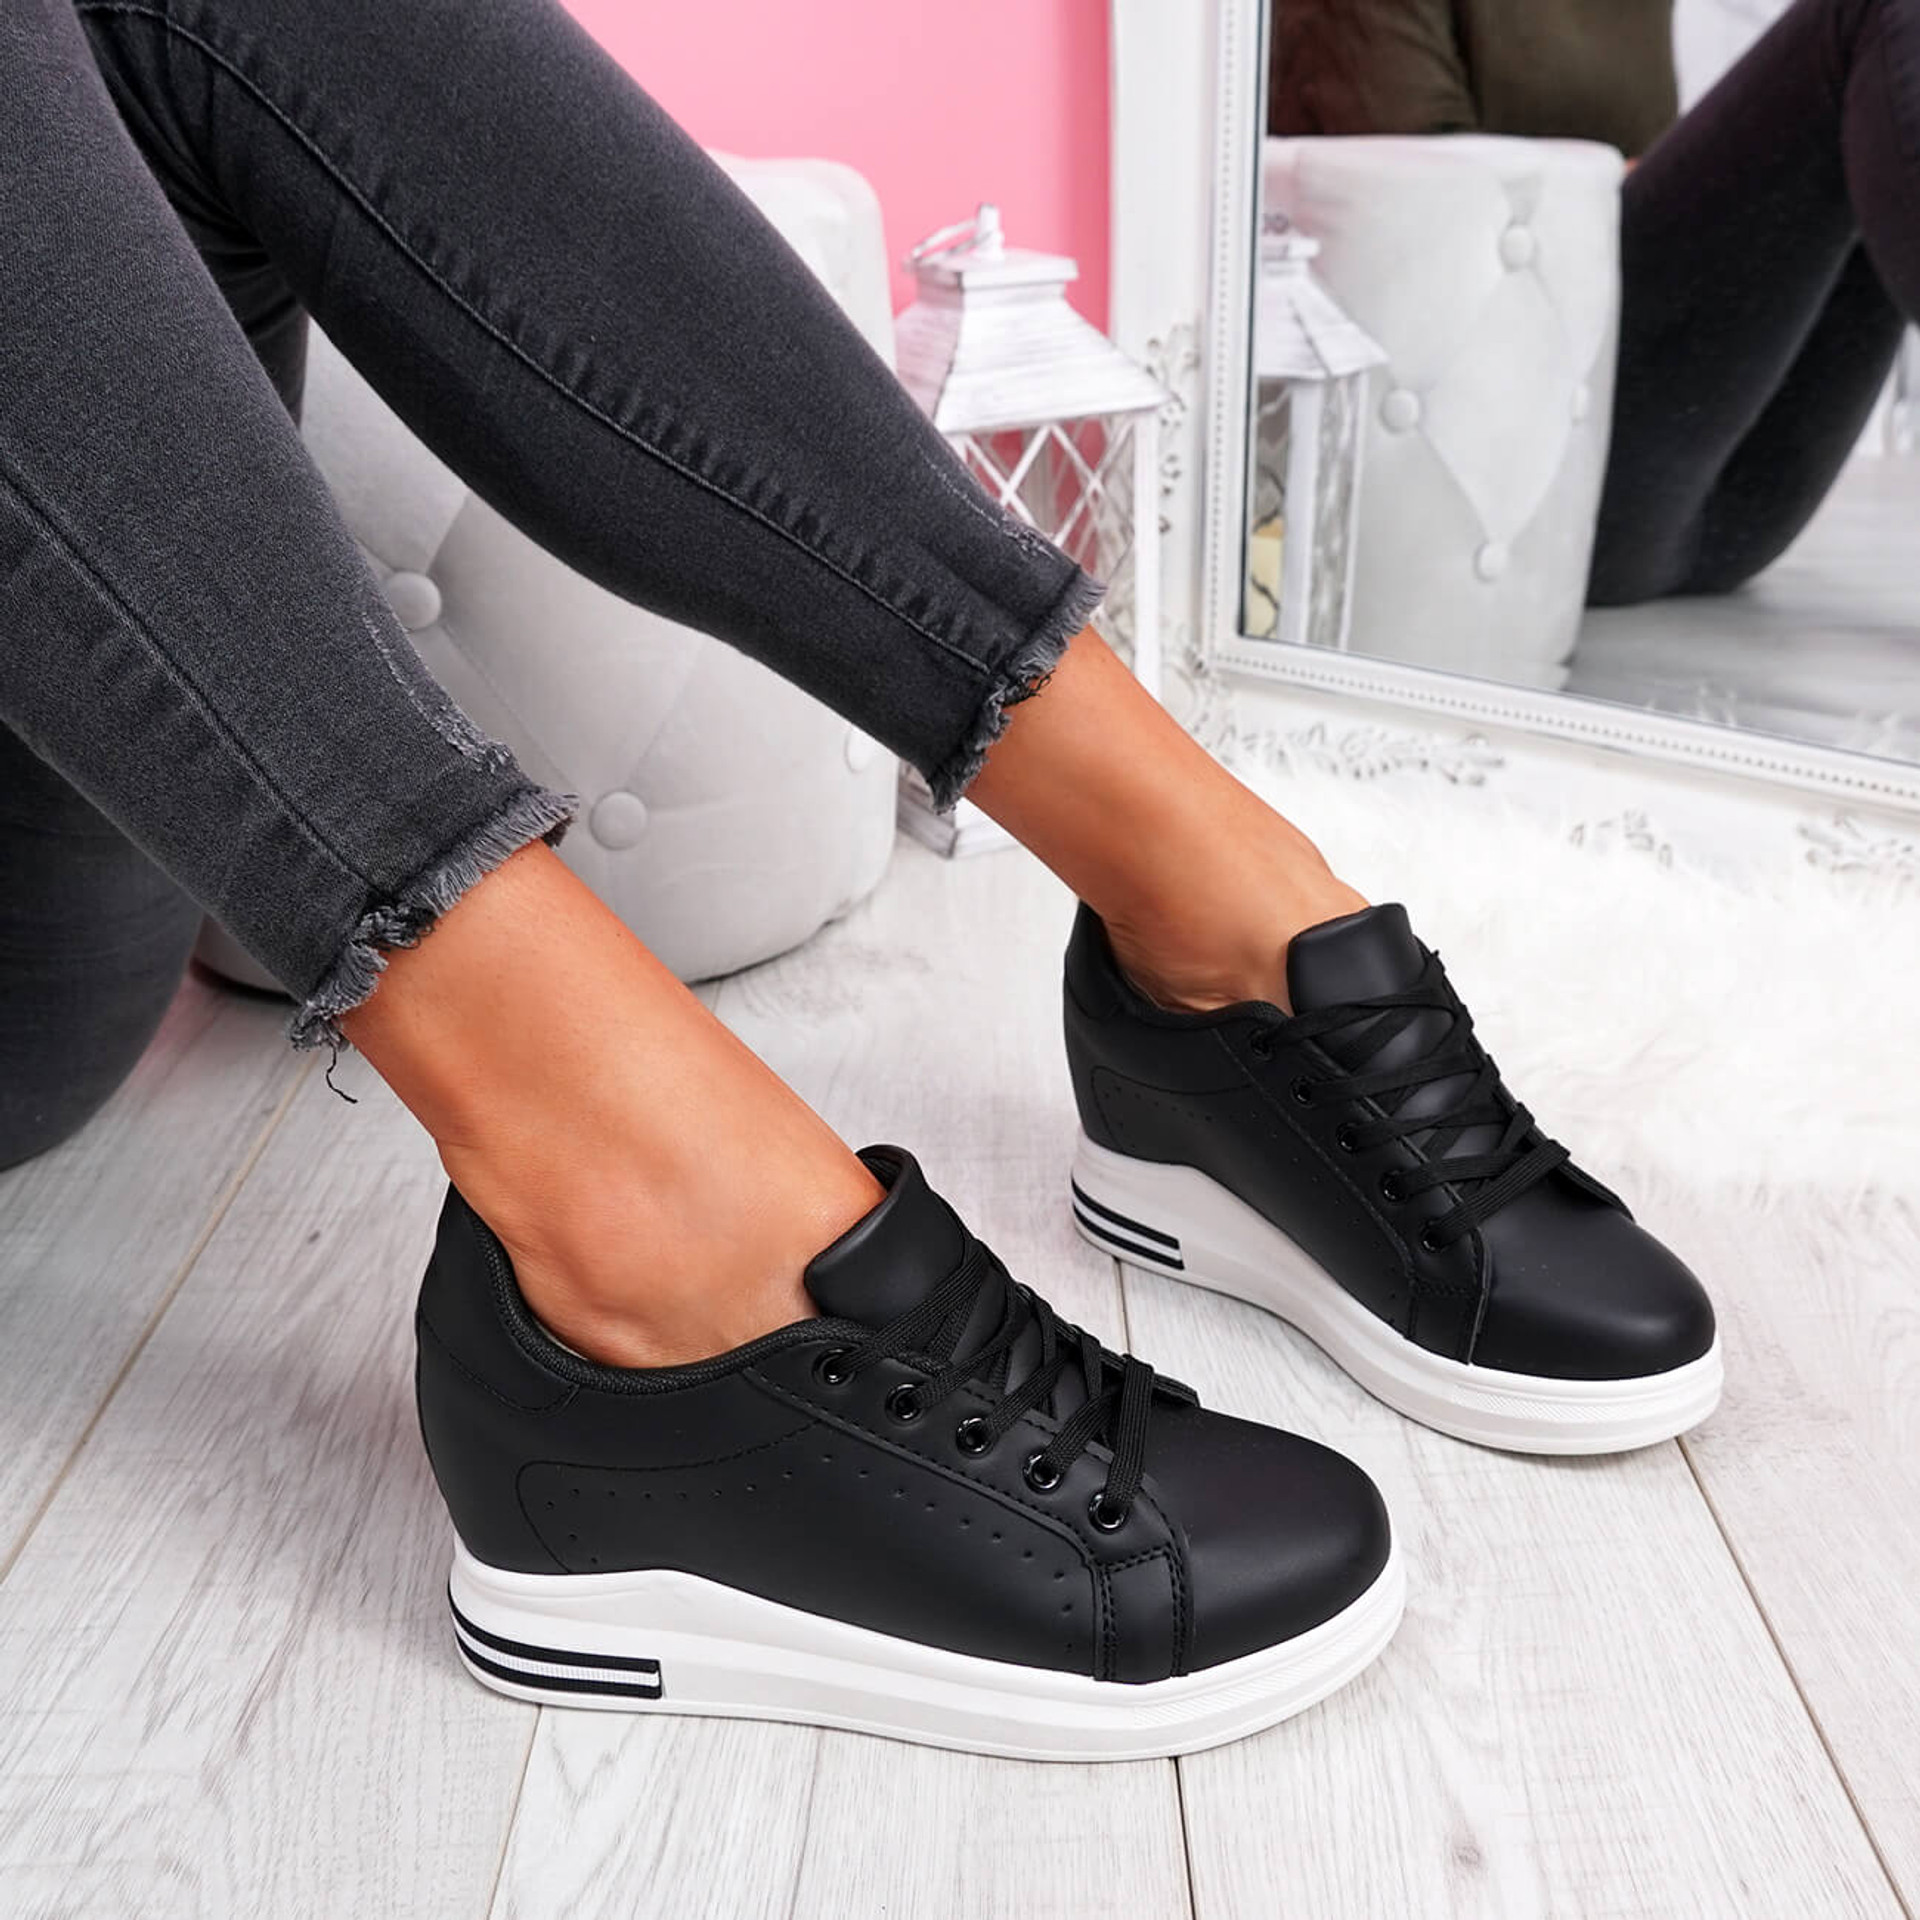 womens ladies wedge trainers lace up party plimsolls sneakers women shoes size uk 3 4 5 6 7 8